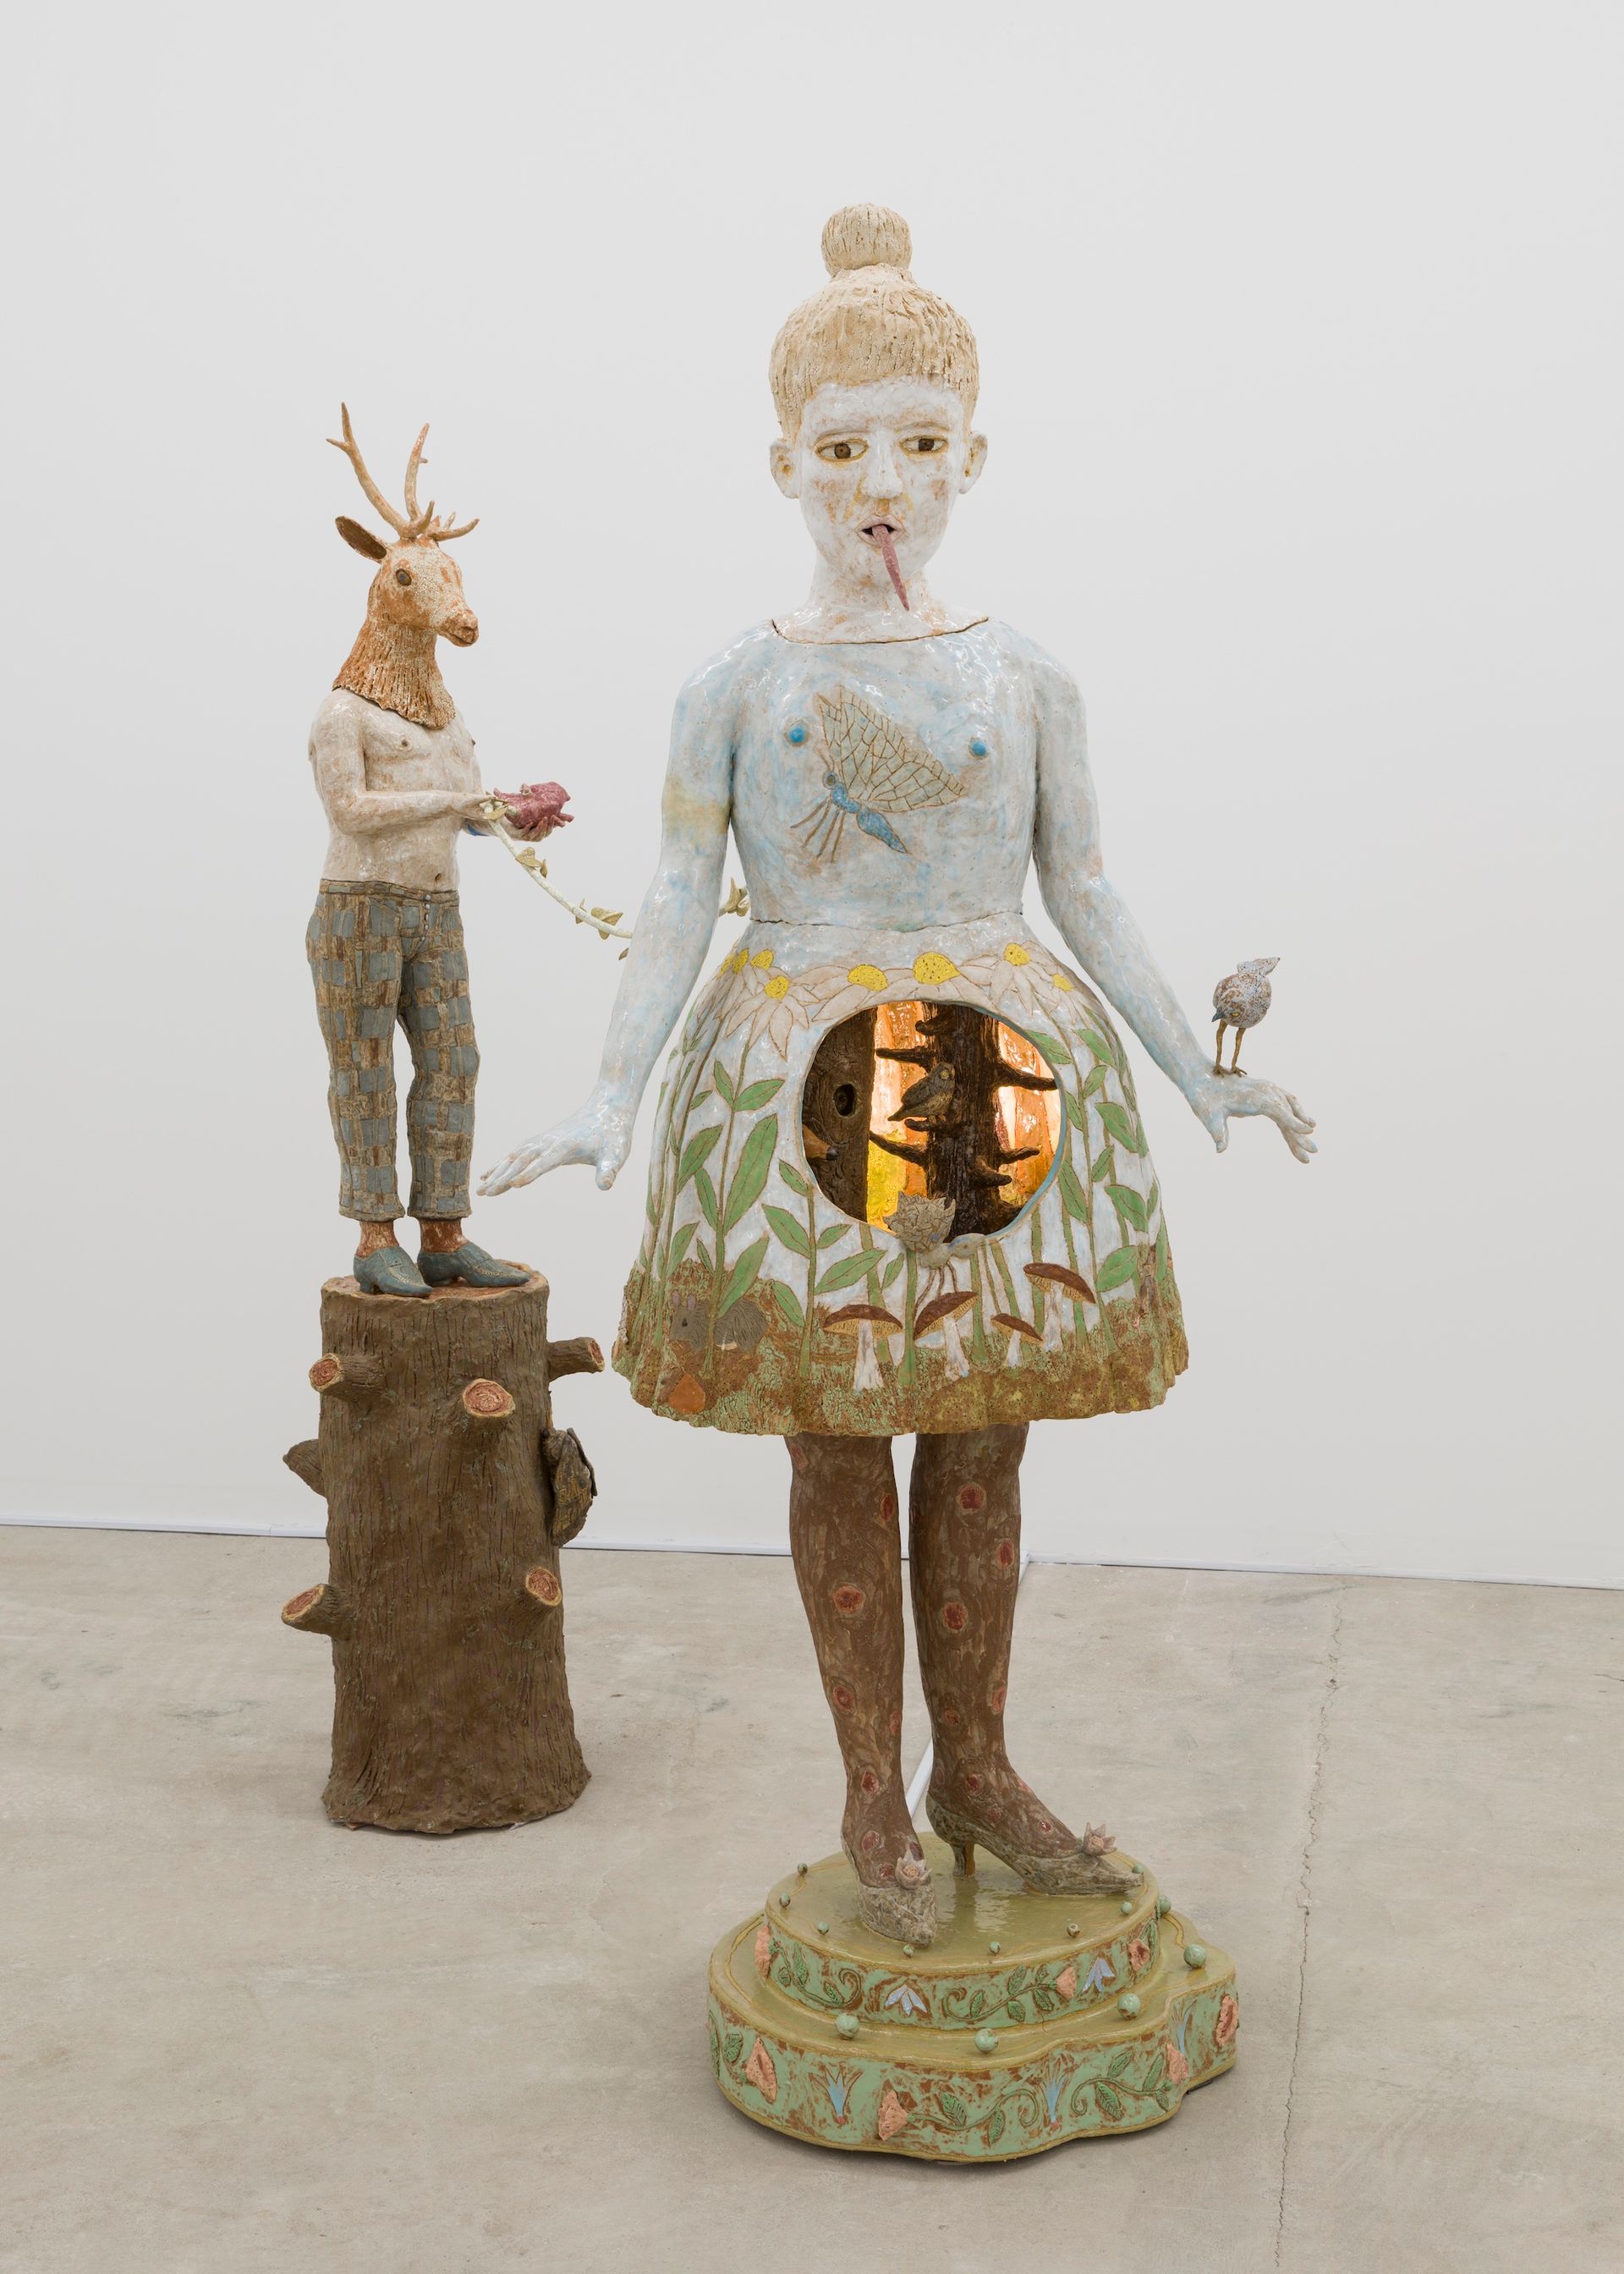 Kathy Ruttenberg, A Little Birdie Told Me, 2014 Courtesy of the artist and Lyles & King, New York. Photo credit: Charles Benton.